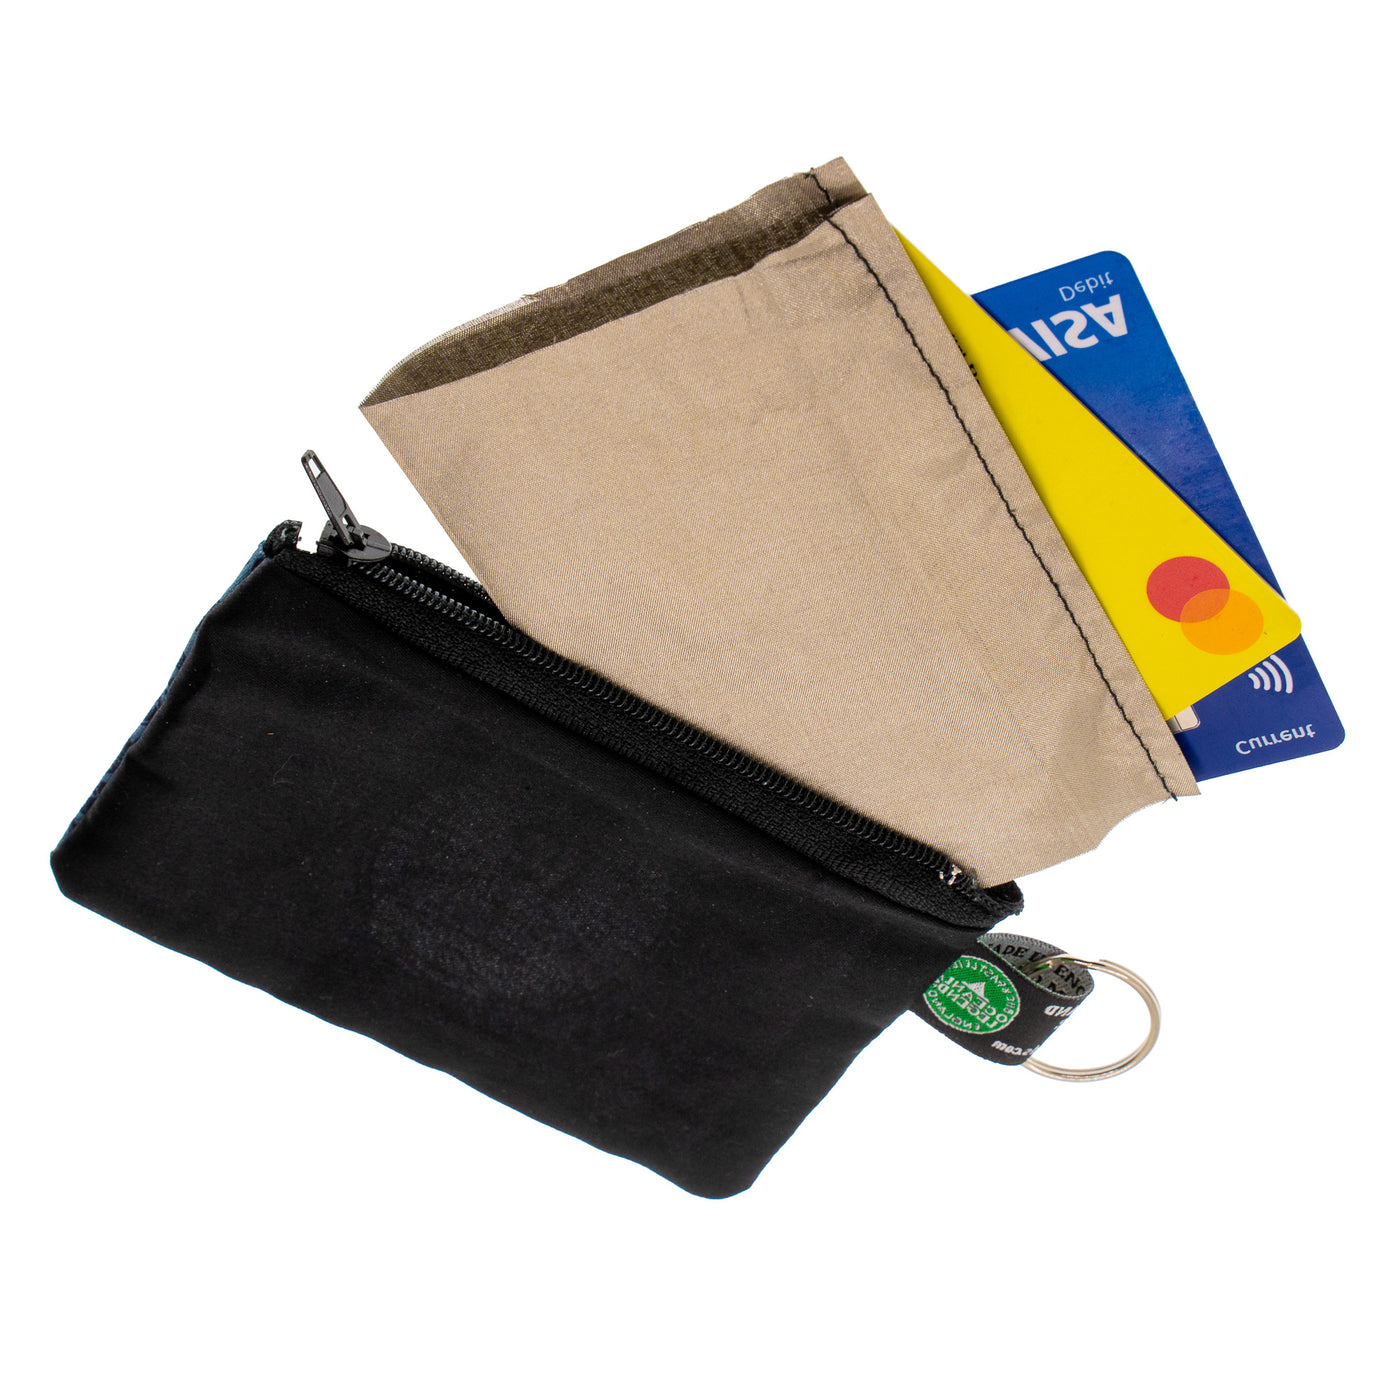 RFID Scanner Protection for your credit/debit cards